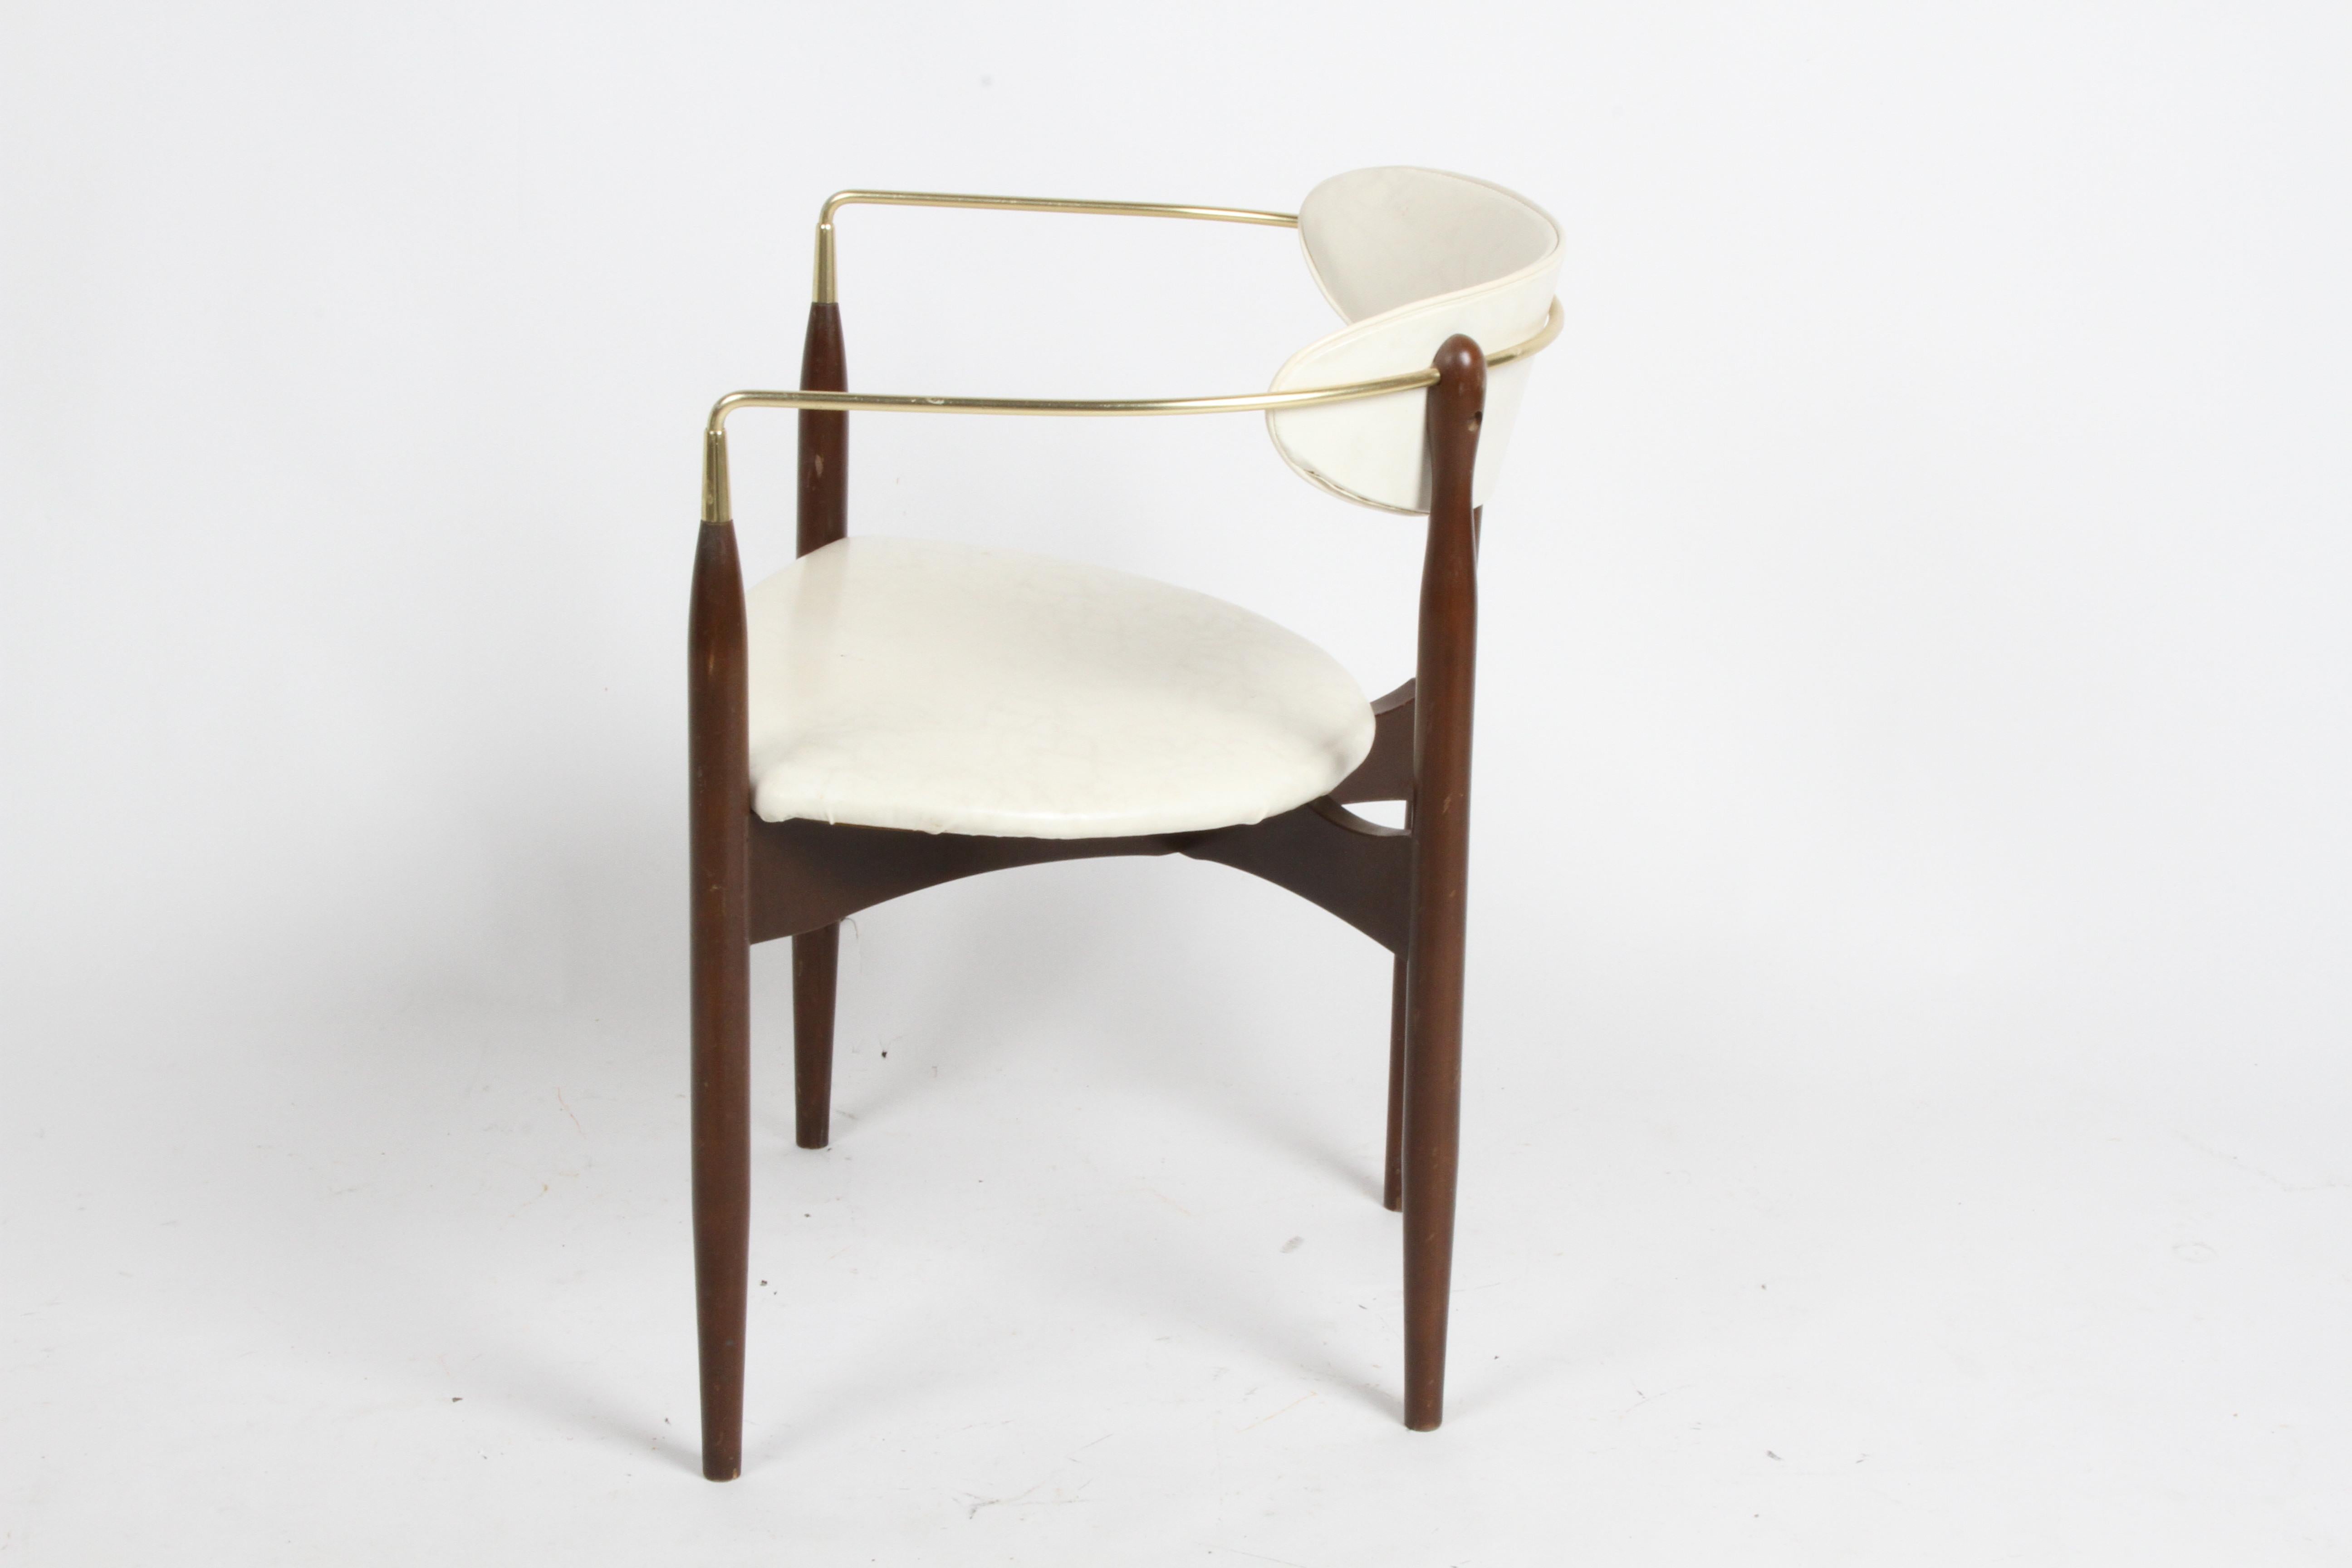 Completely Restored Dan Johnson for Viscount Mid-Century Brass Armchair 1950s For Sale 5